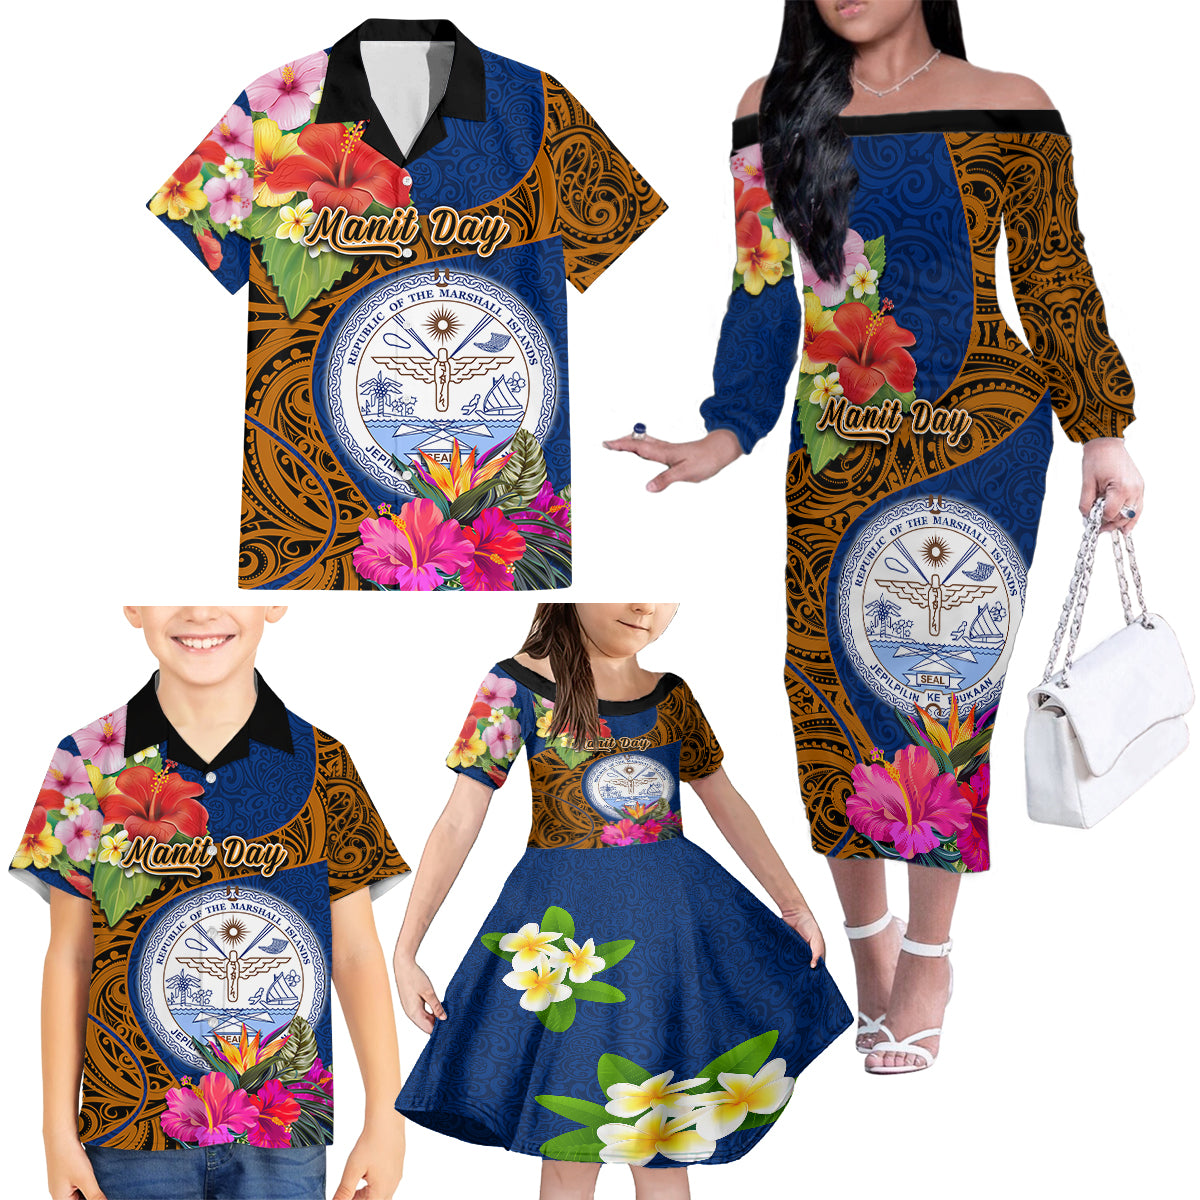 marshall-islands-manit-day-family-matching-off-shoulder-long-sleeve-dress-and-hawaiian-shirt-marshall-seal-mix-hibiscus-flower-maori-pattern-style